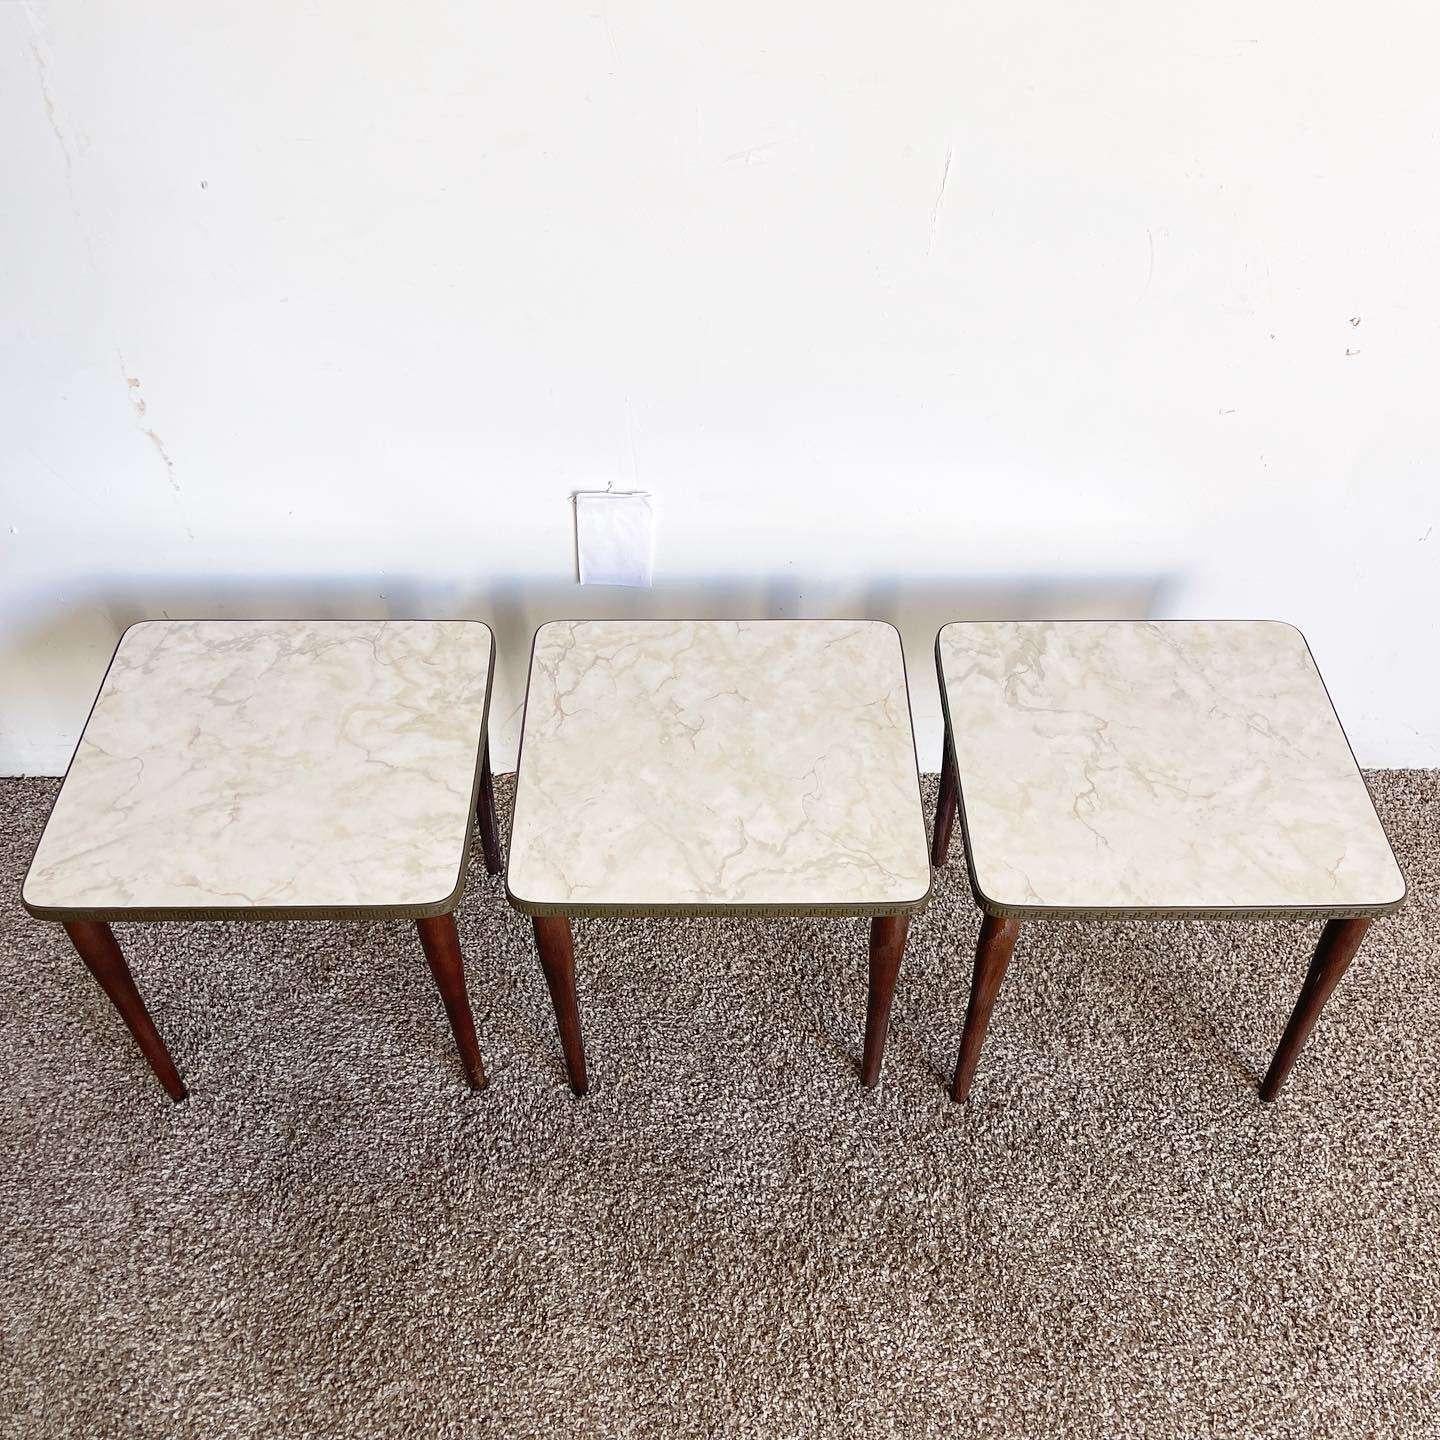 Discover the versatility and elegance of this exceptional set of vintage mid-century modern stacking/nesting tables. With their square wooden legs and faux marble laminate tops adorned with Greek design banding, these tables effortlessly combine